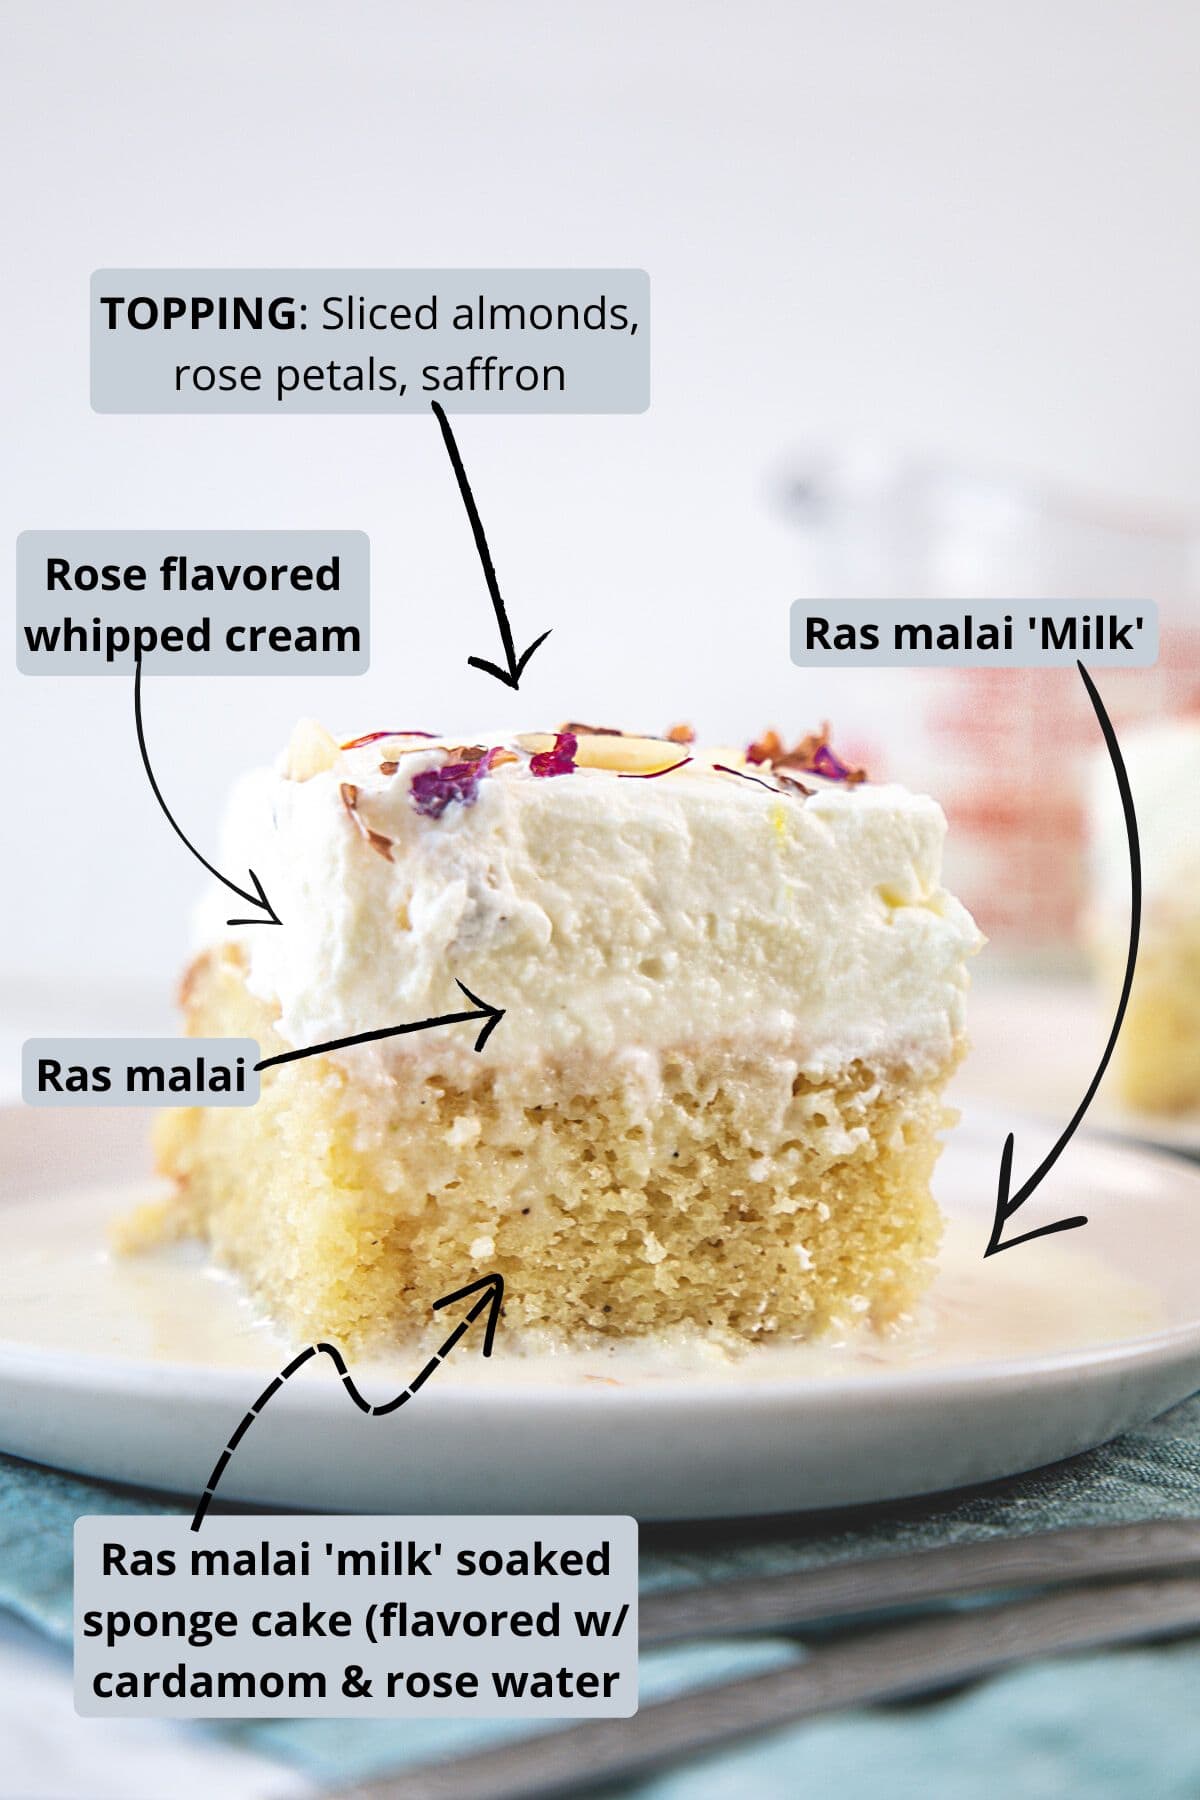 Rasmalai cake layers explained with labels.